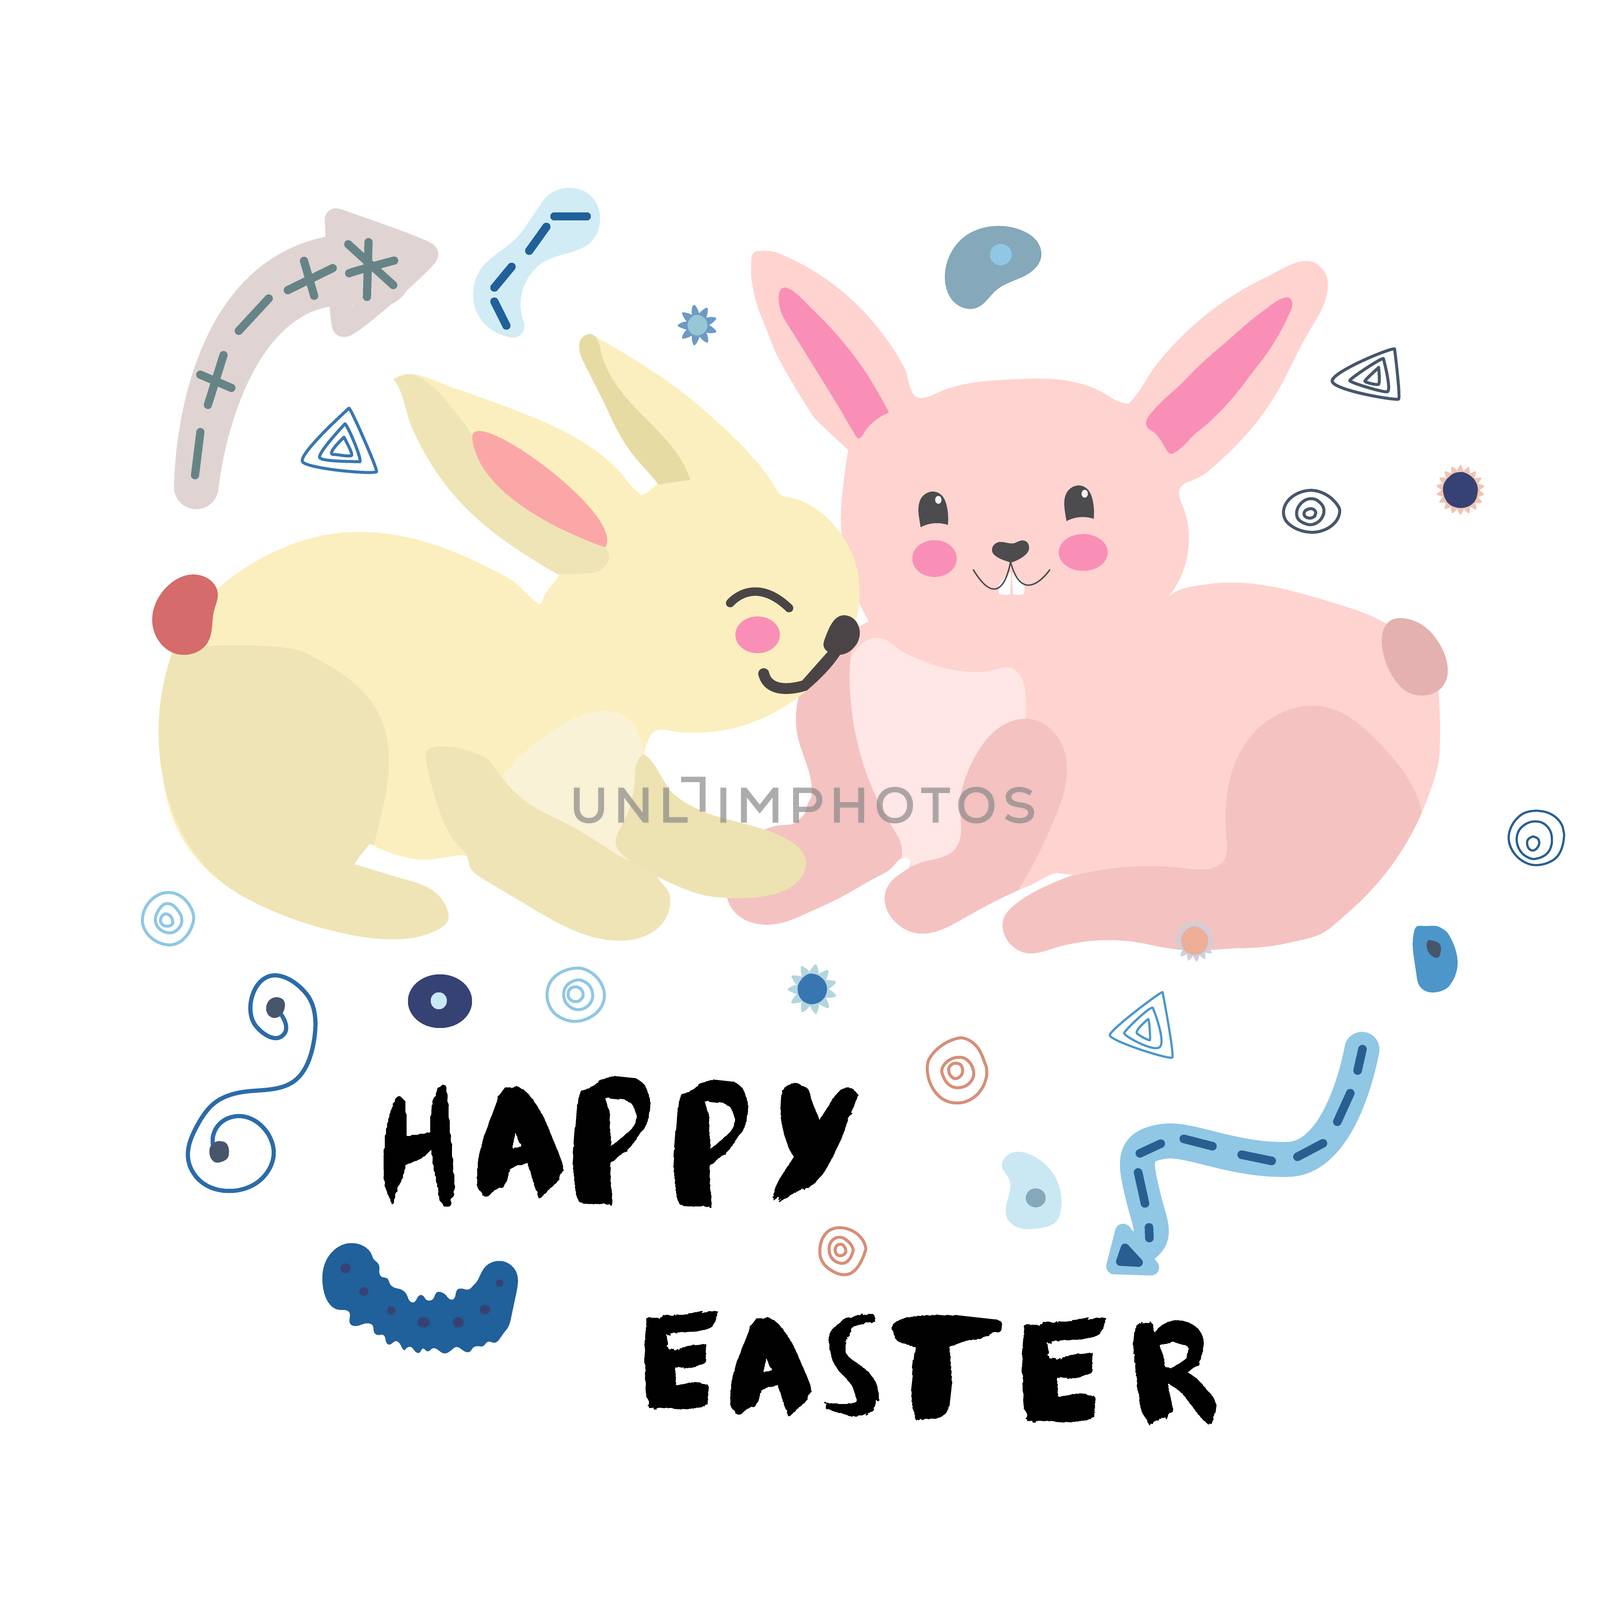 Pink and yellow cute easter bunnies with handwritten note happy easter. Vector illustration on white background with doodle elements.